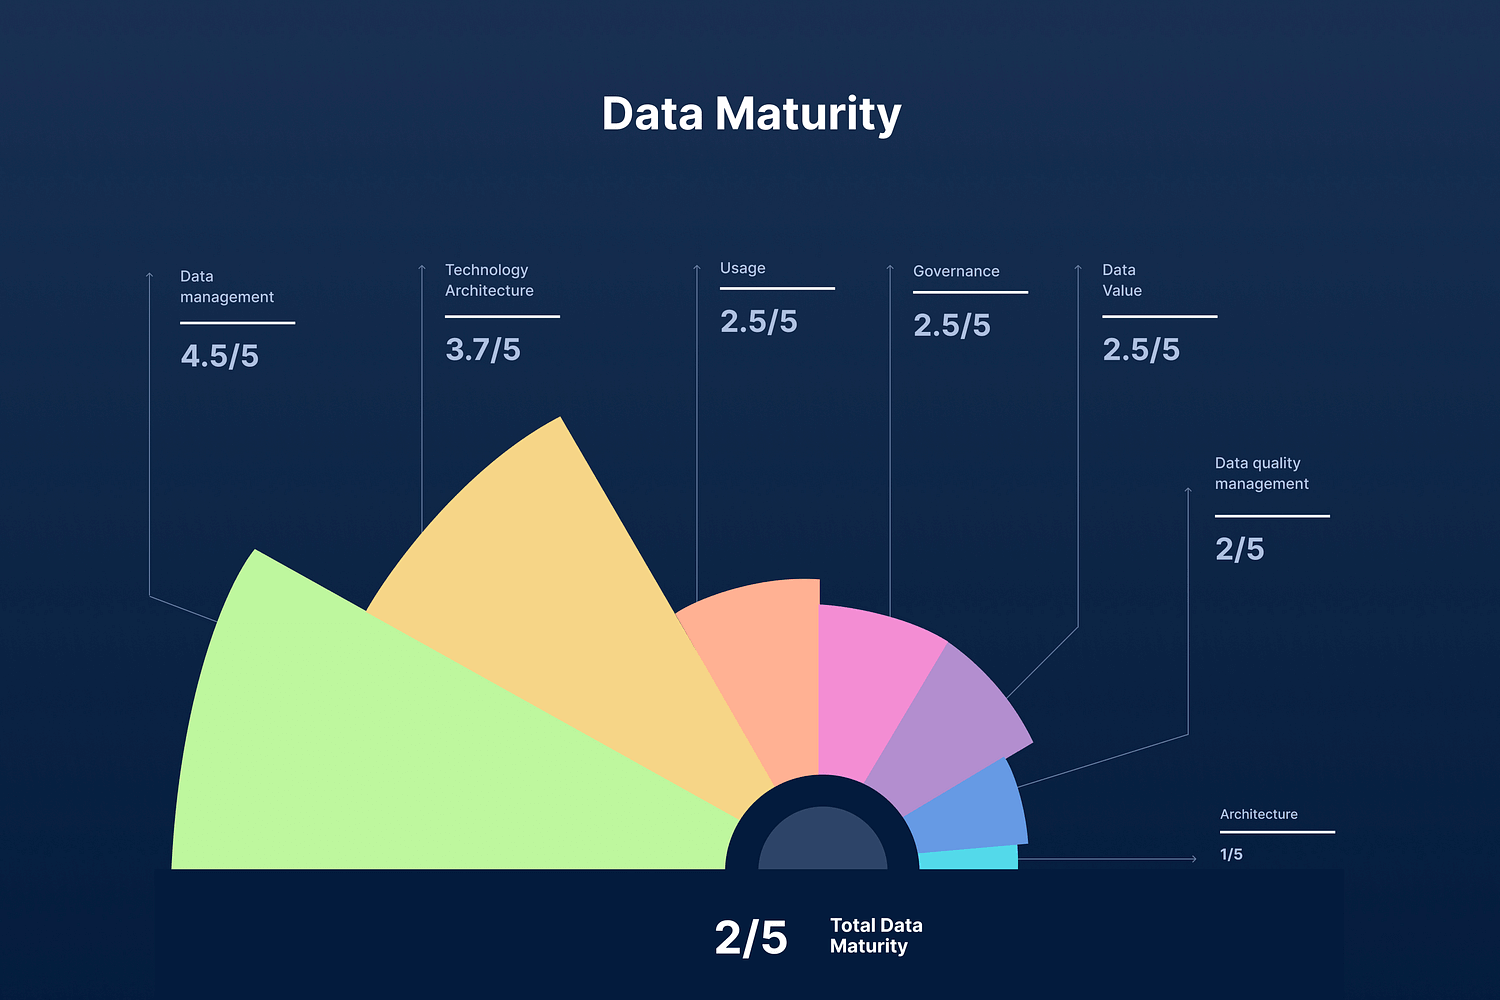 Data maturity visualization with ratings